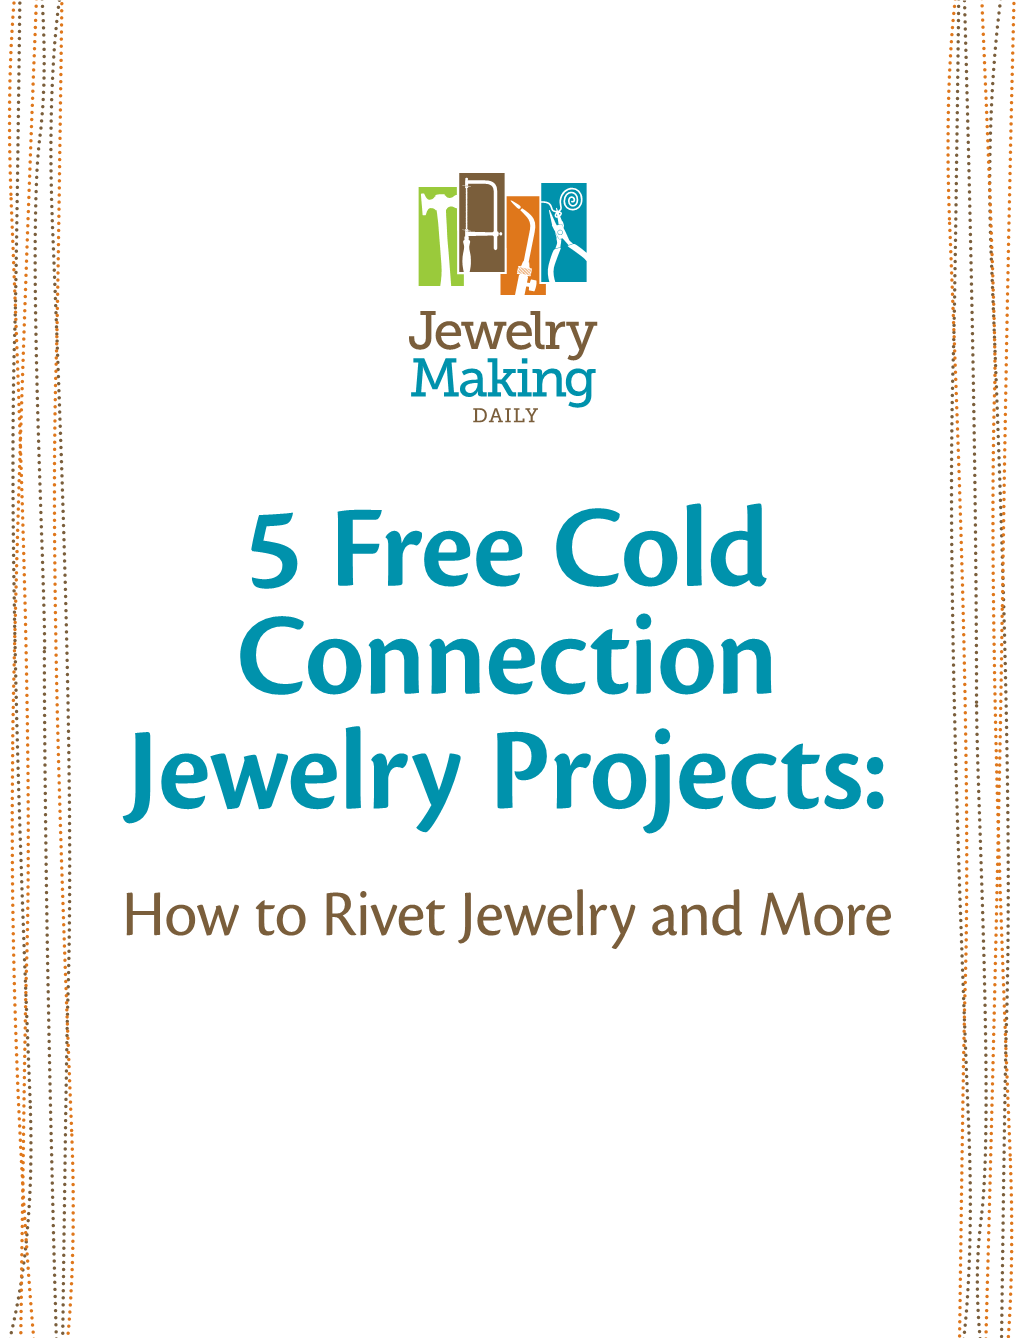 How to Rivet Jewelry and More 5 Free Cold Connection Jewelry Projects: How to Rivet Jewelry and More